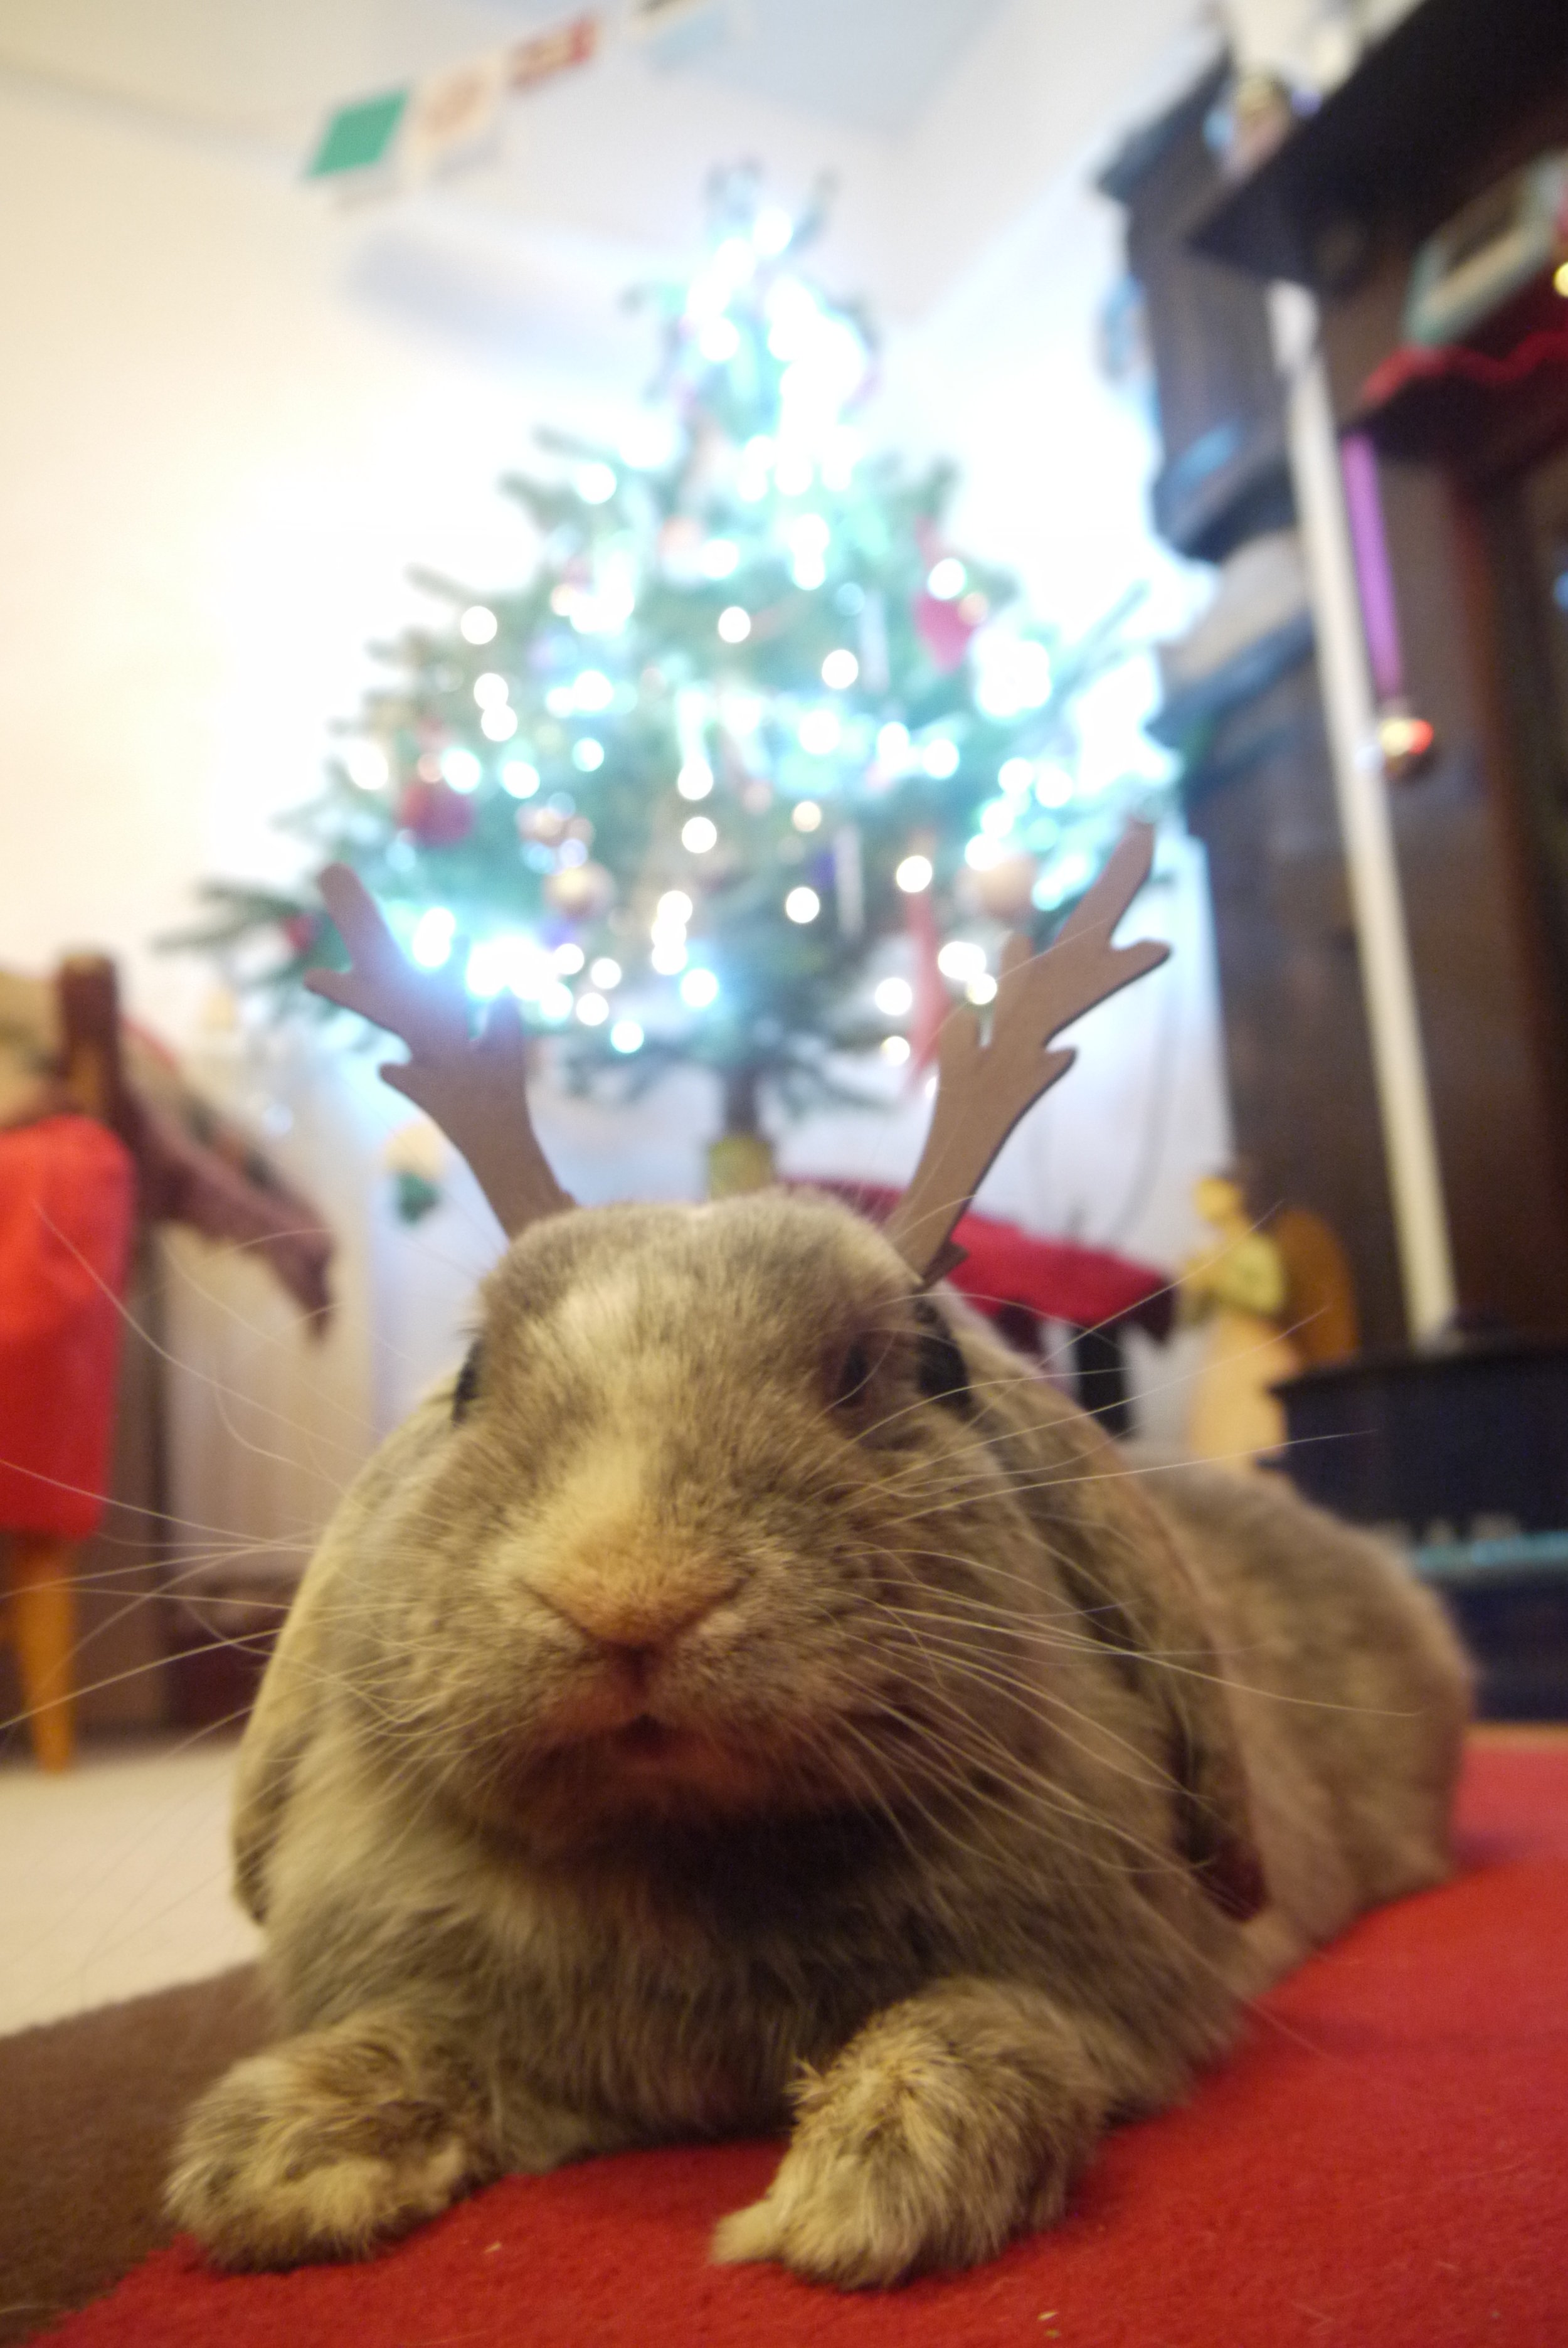 Relaxing Bunny Doesn't Exactly Share a Reindeer's Work Ethic